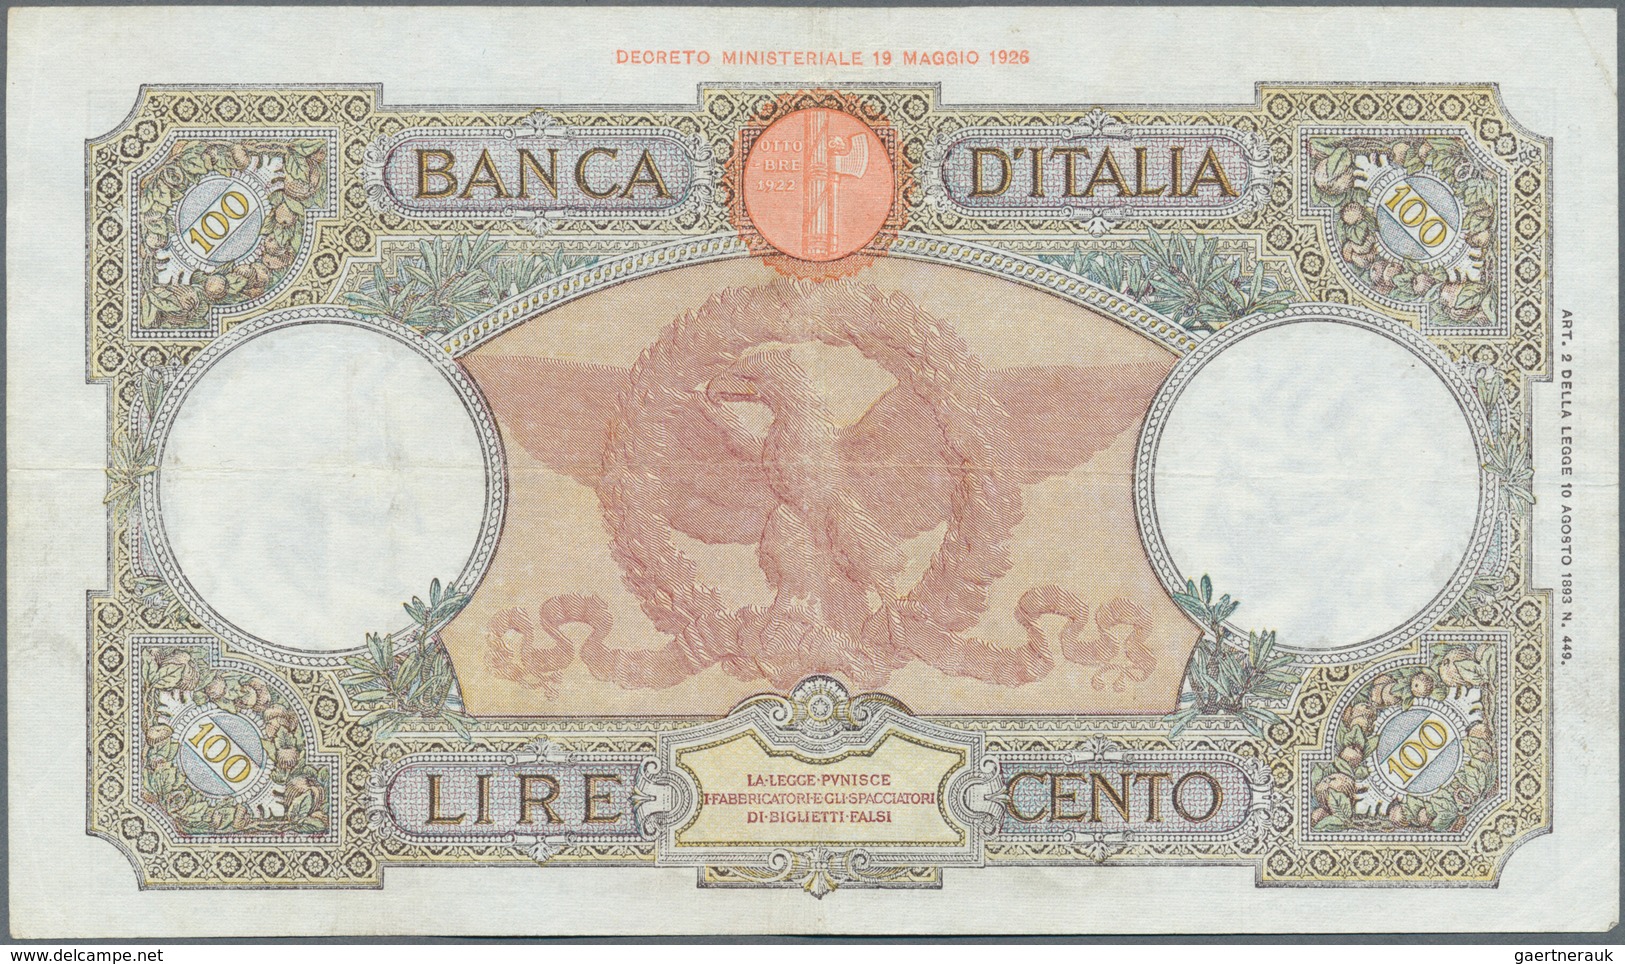 Italy / Italien: set of 8 notes 100 Lire 1937/39/40/42 P. 55, all used with folds, border tears poss